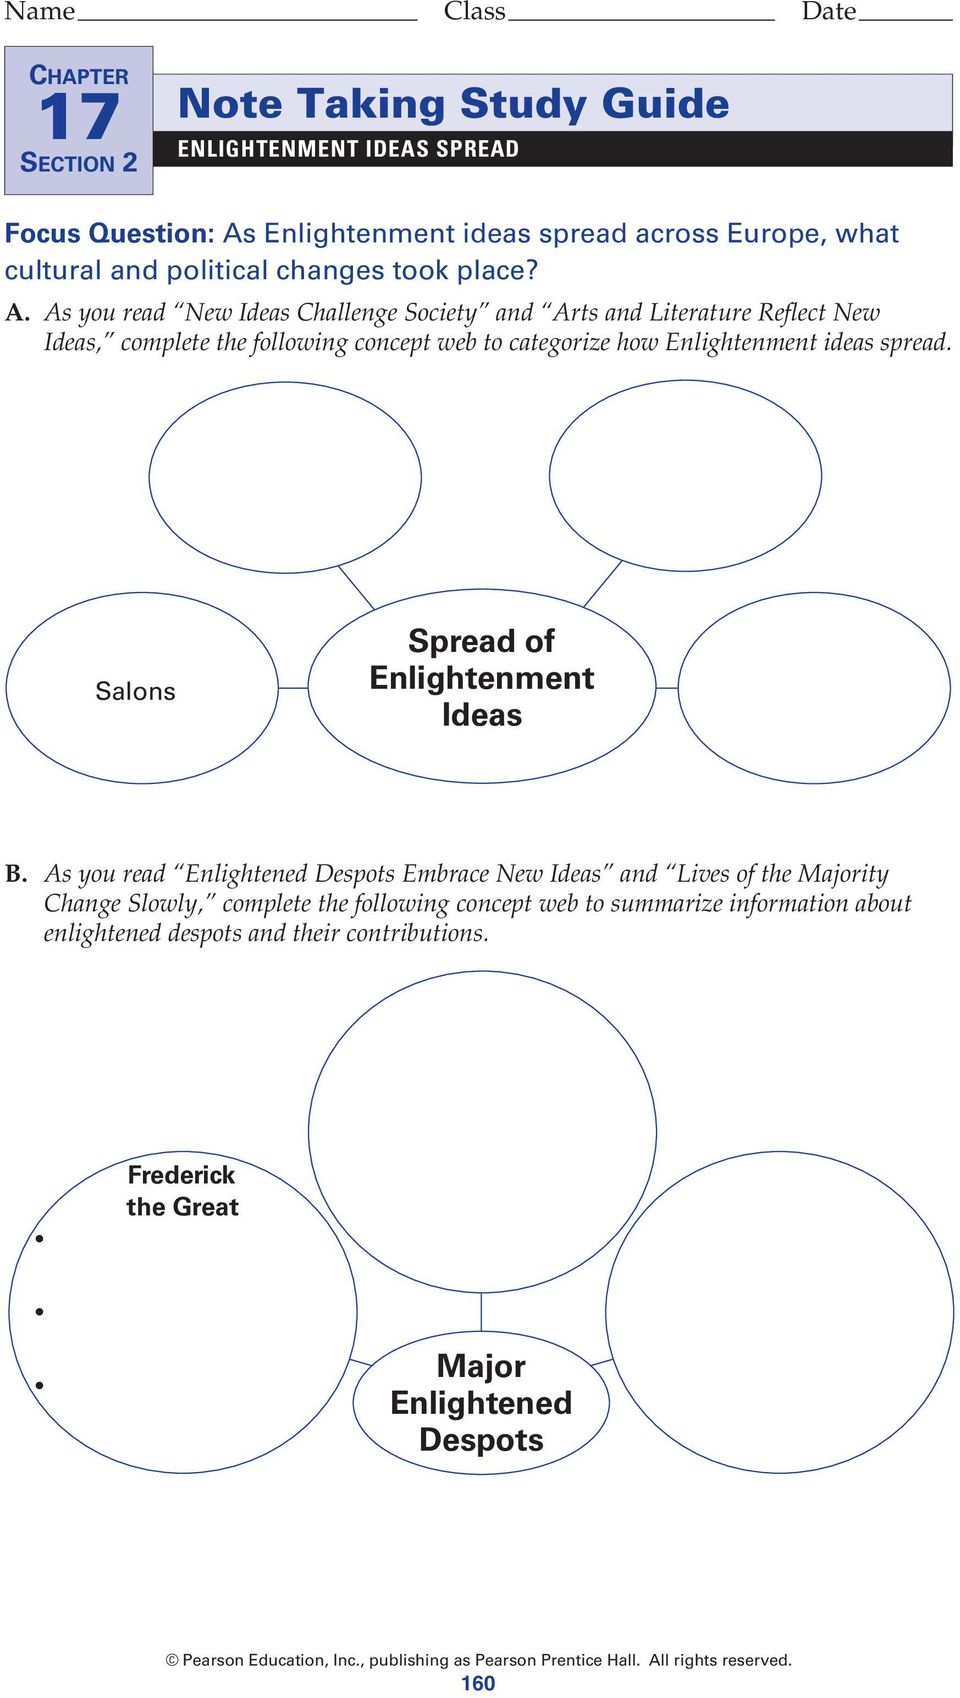 As you read New Ideas Challenge Society and Arts and Literature Reflect New Ideas, complete the following concept web to categorize how Enlightenment ideas